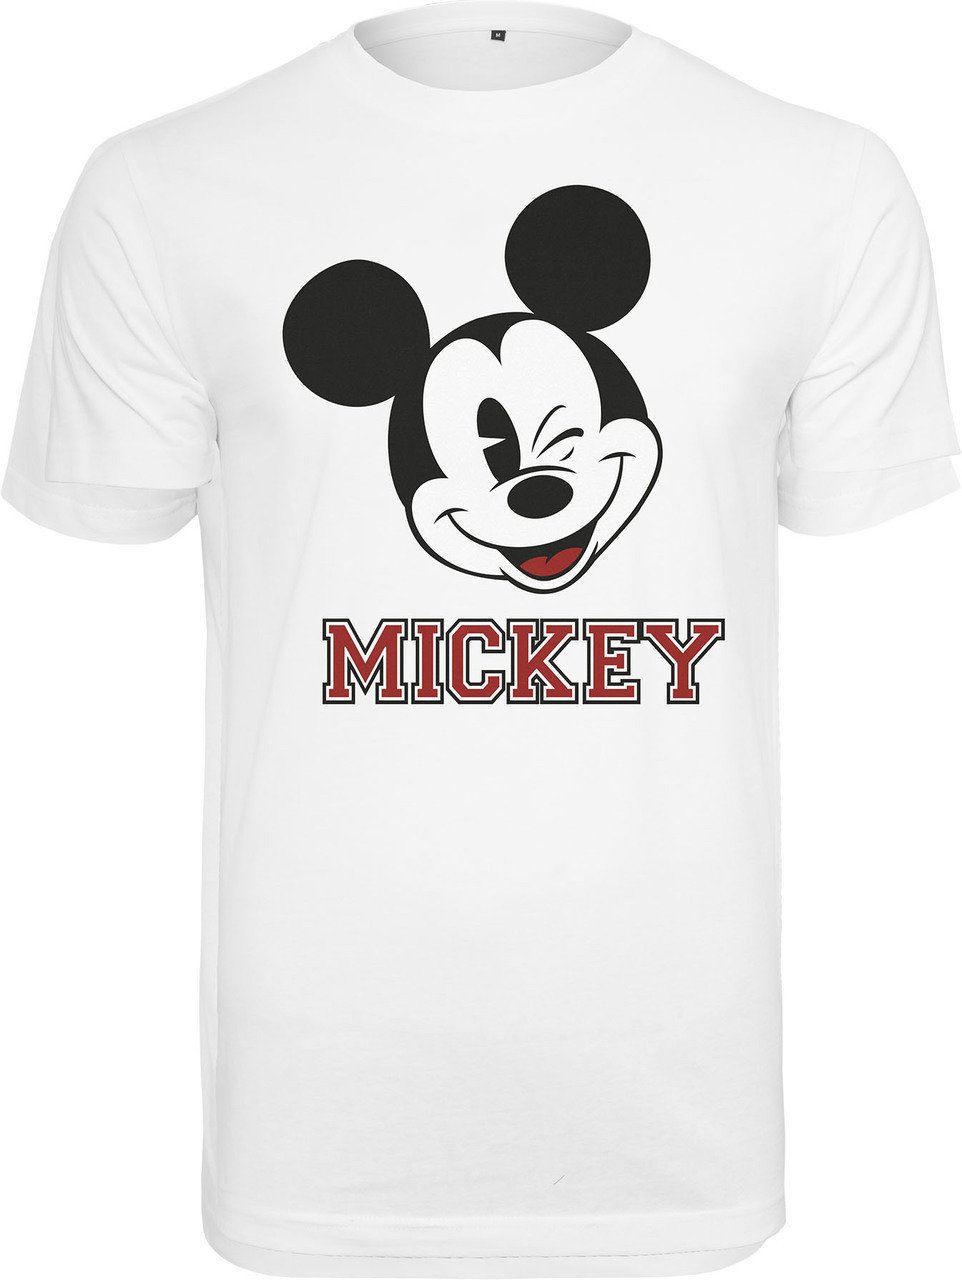 Shirt Mickey Mouse Shirt College White XS